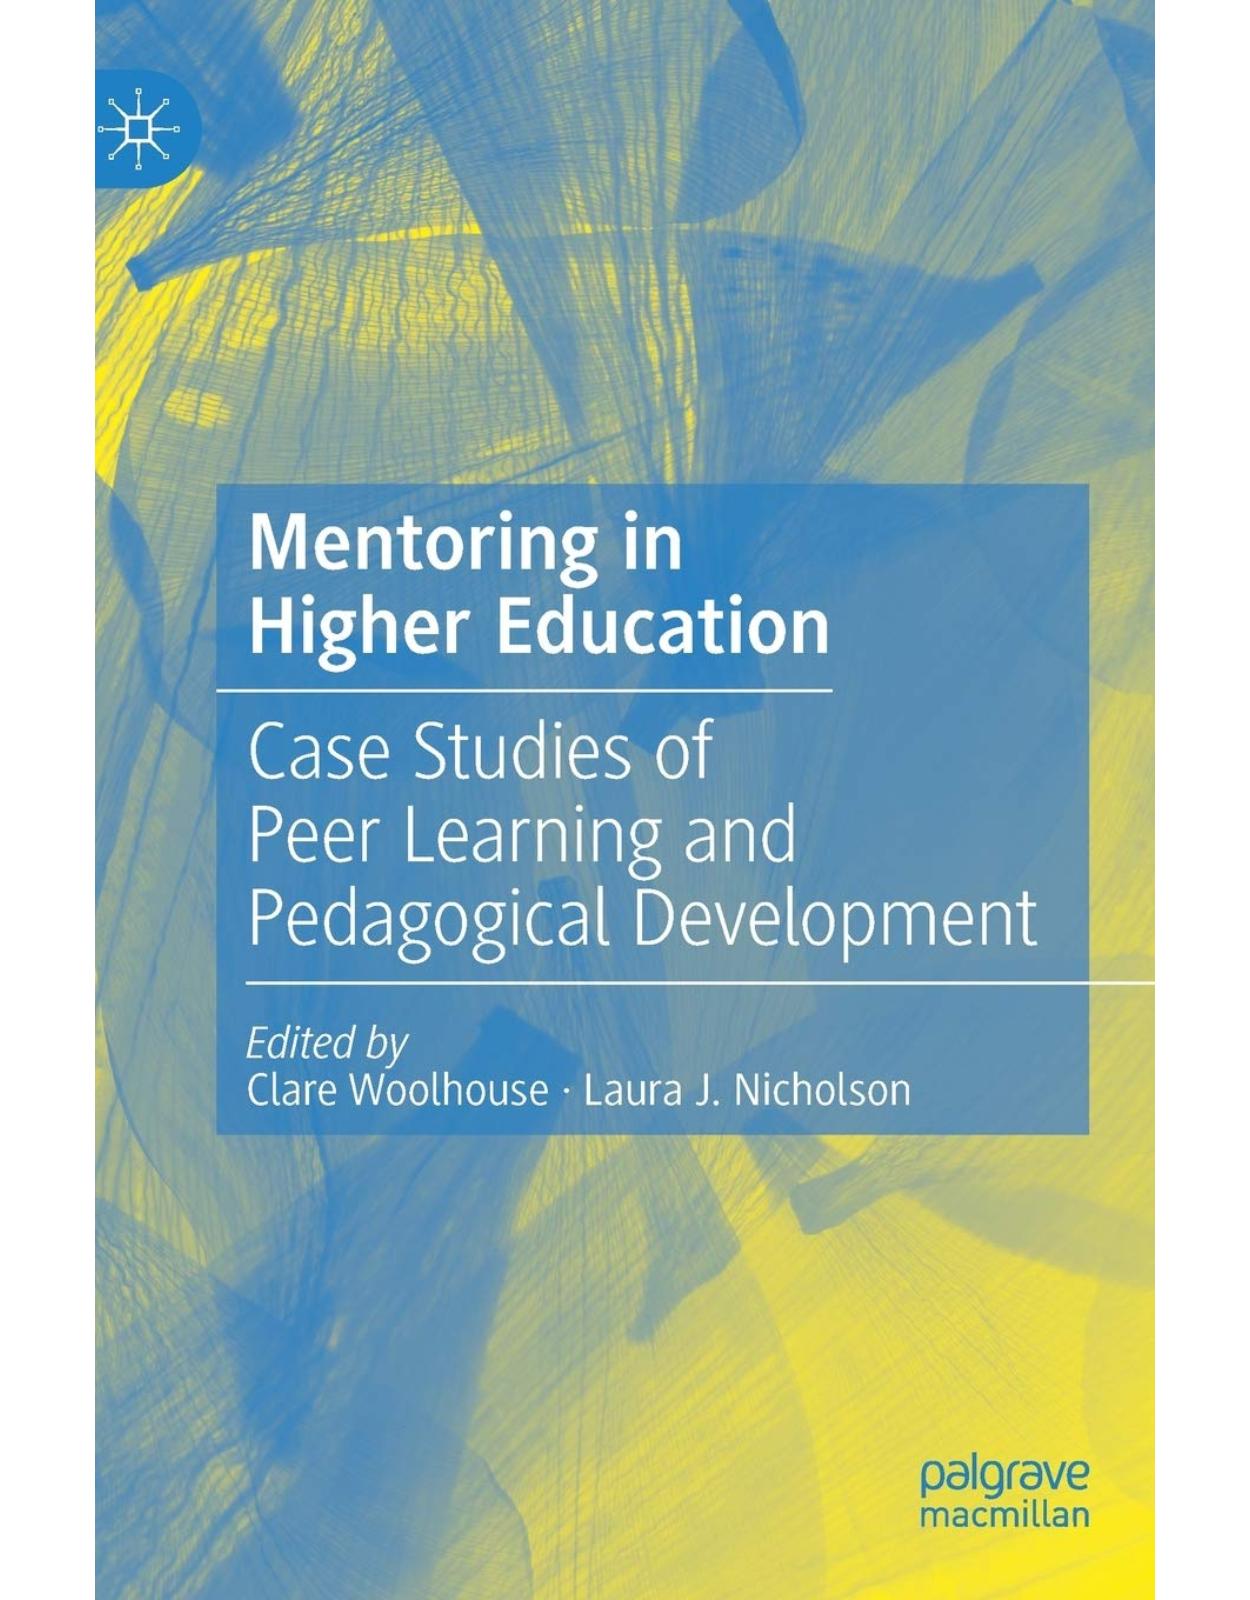 Mentoring in Higher Education: Case Studies of Peer Learning and Pedagogical Development